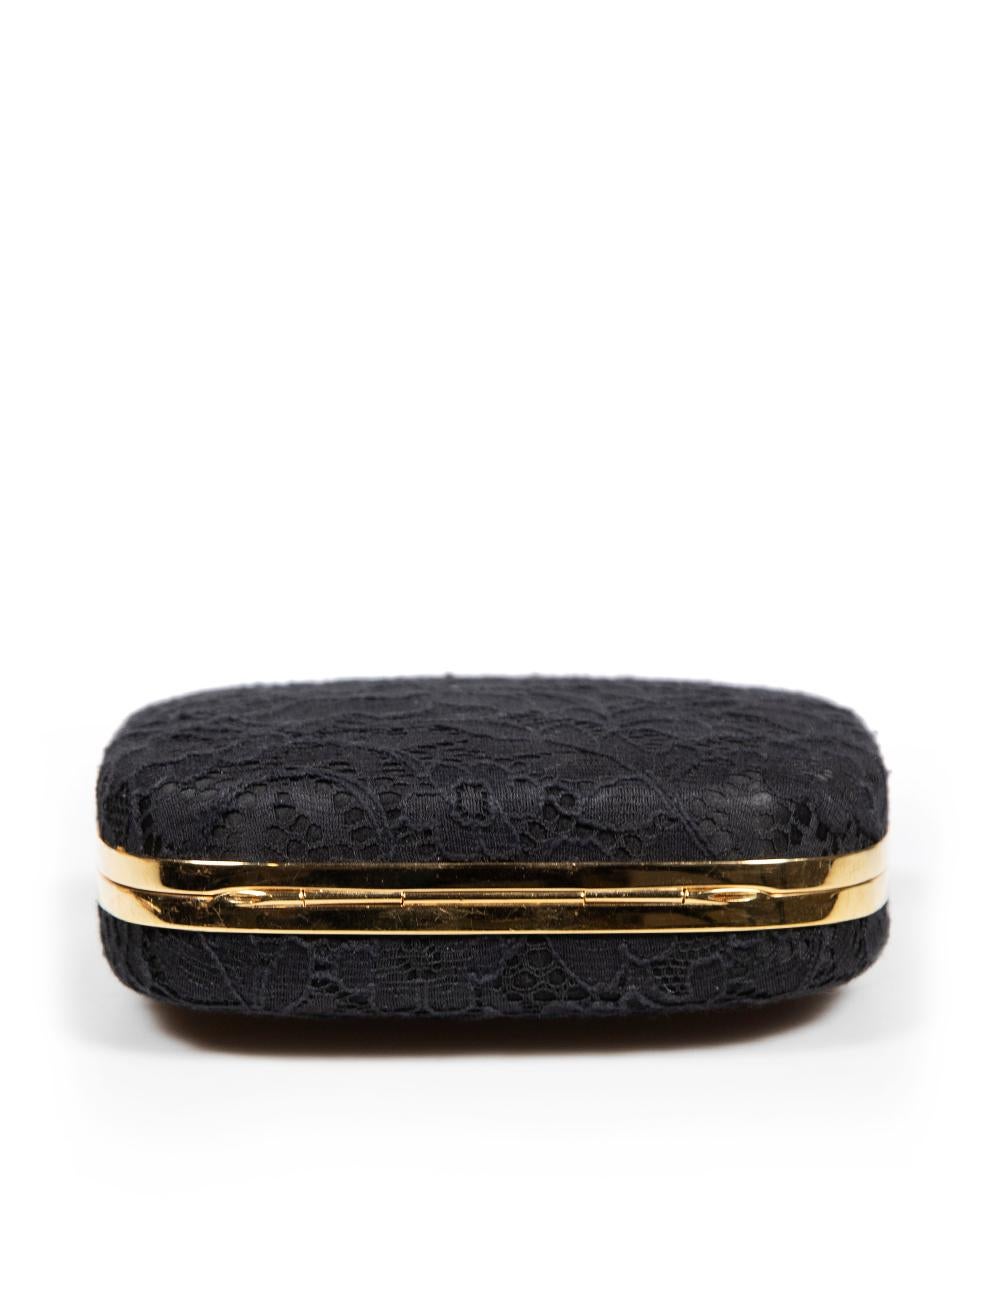 Women's Dolce & Gabbana Black Lace Ring Detail Clutch For Sale